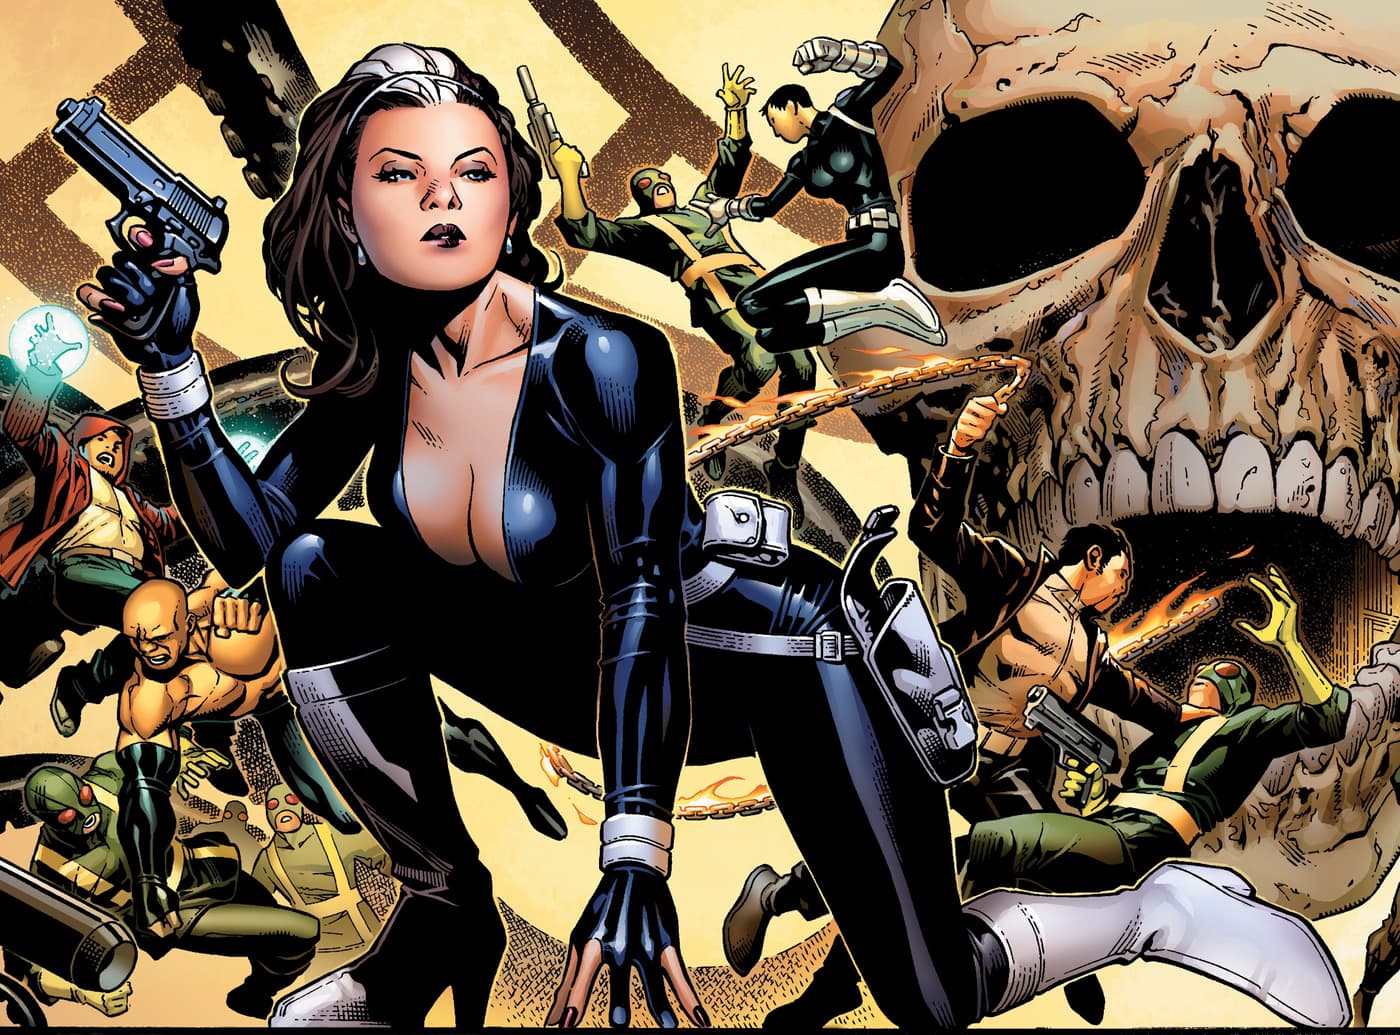 The Contessa in action against Hydra.